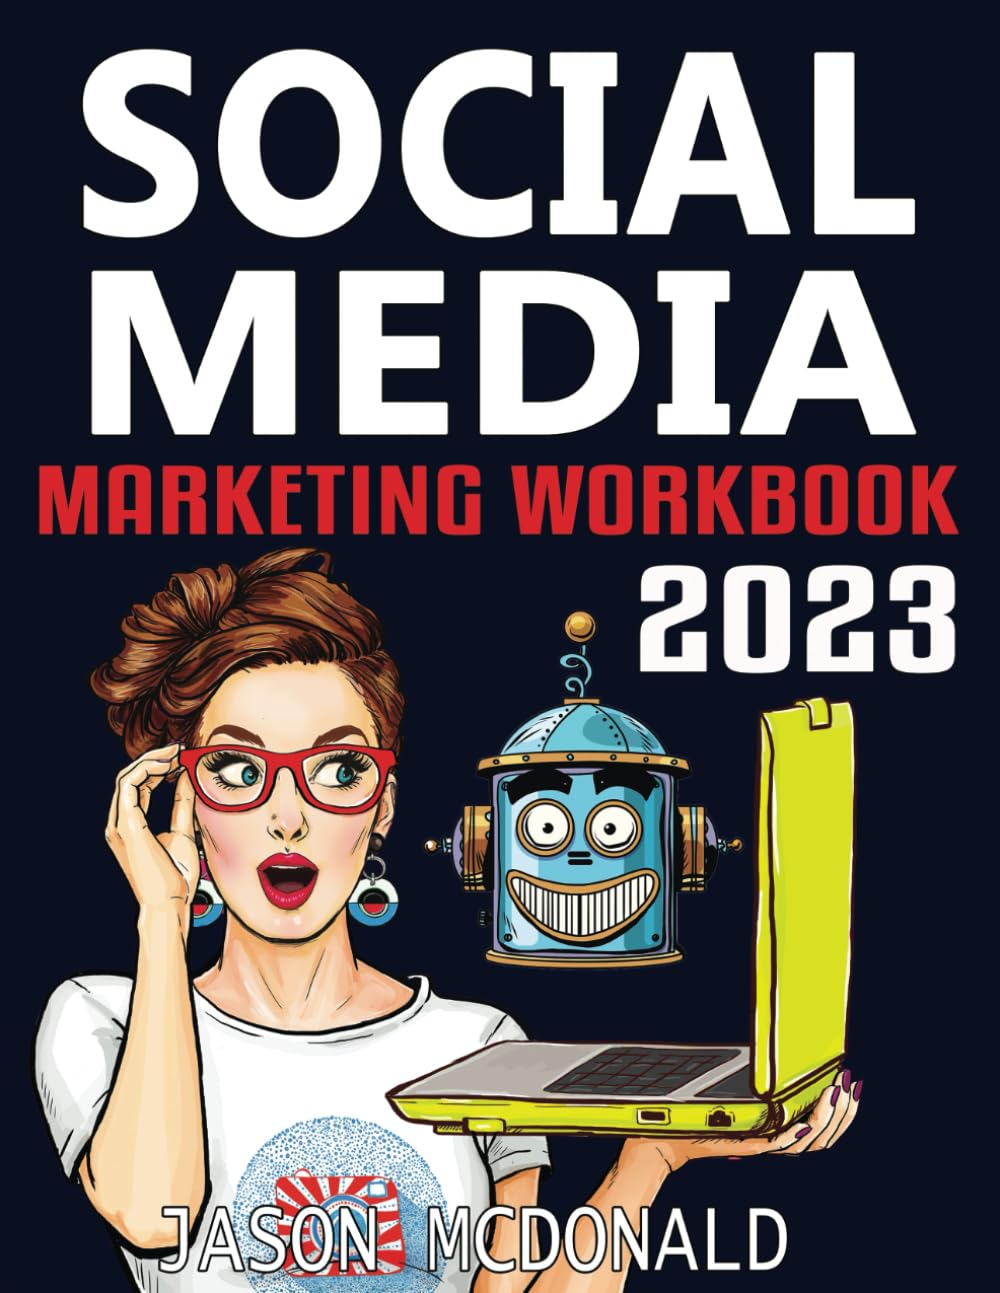 Social Media Marketing Workbook: How to Use Social Media for Business Review